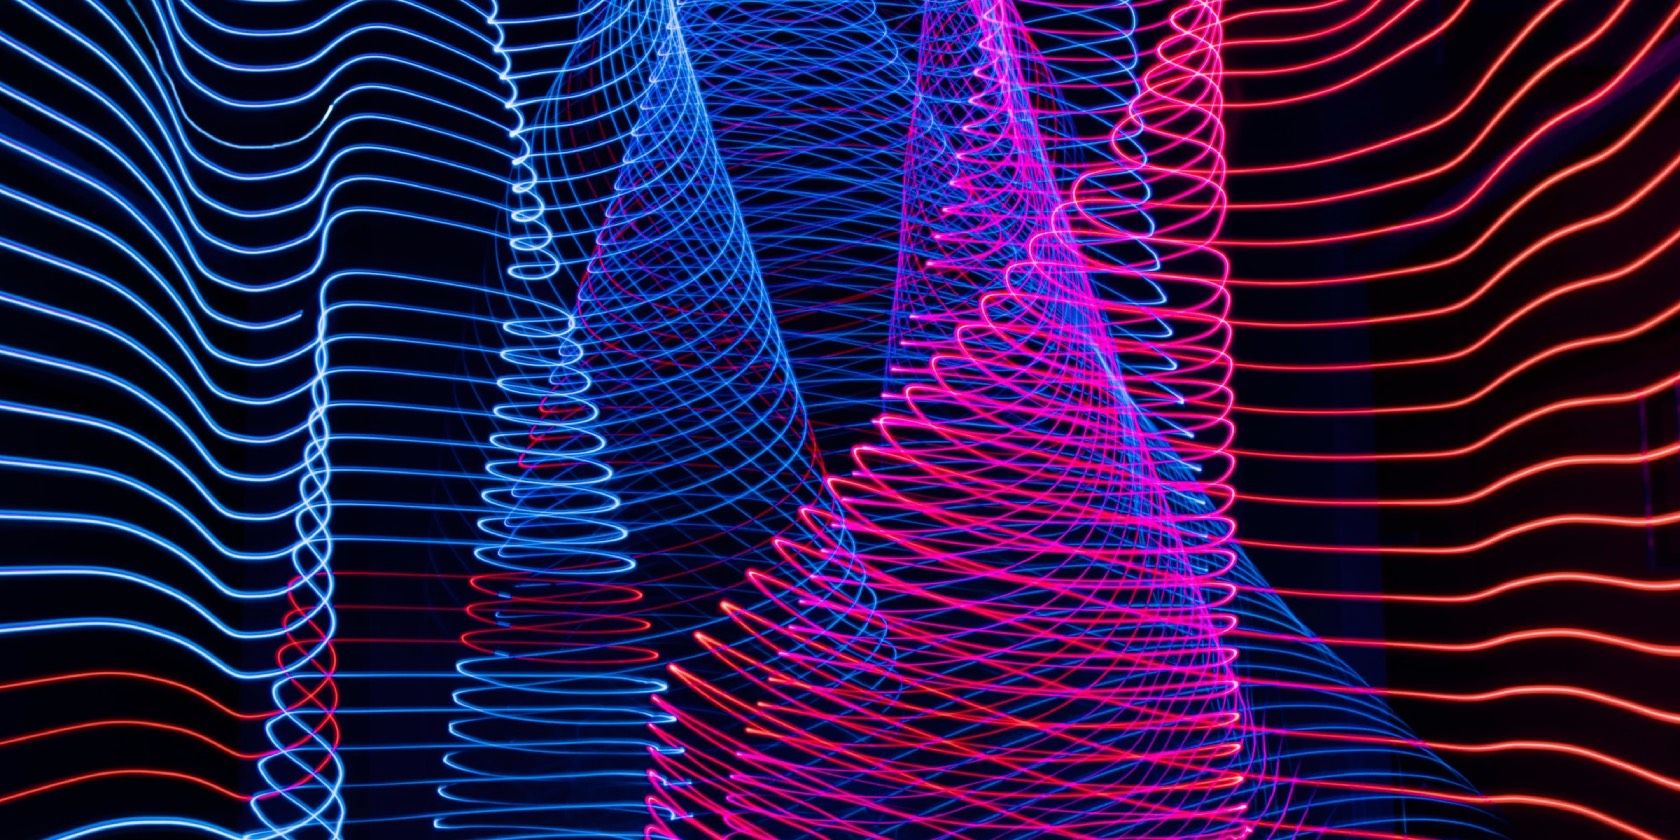 Blue and red waves on black background